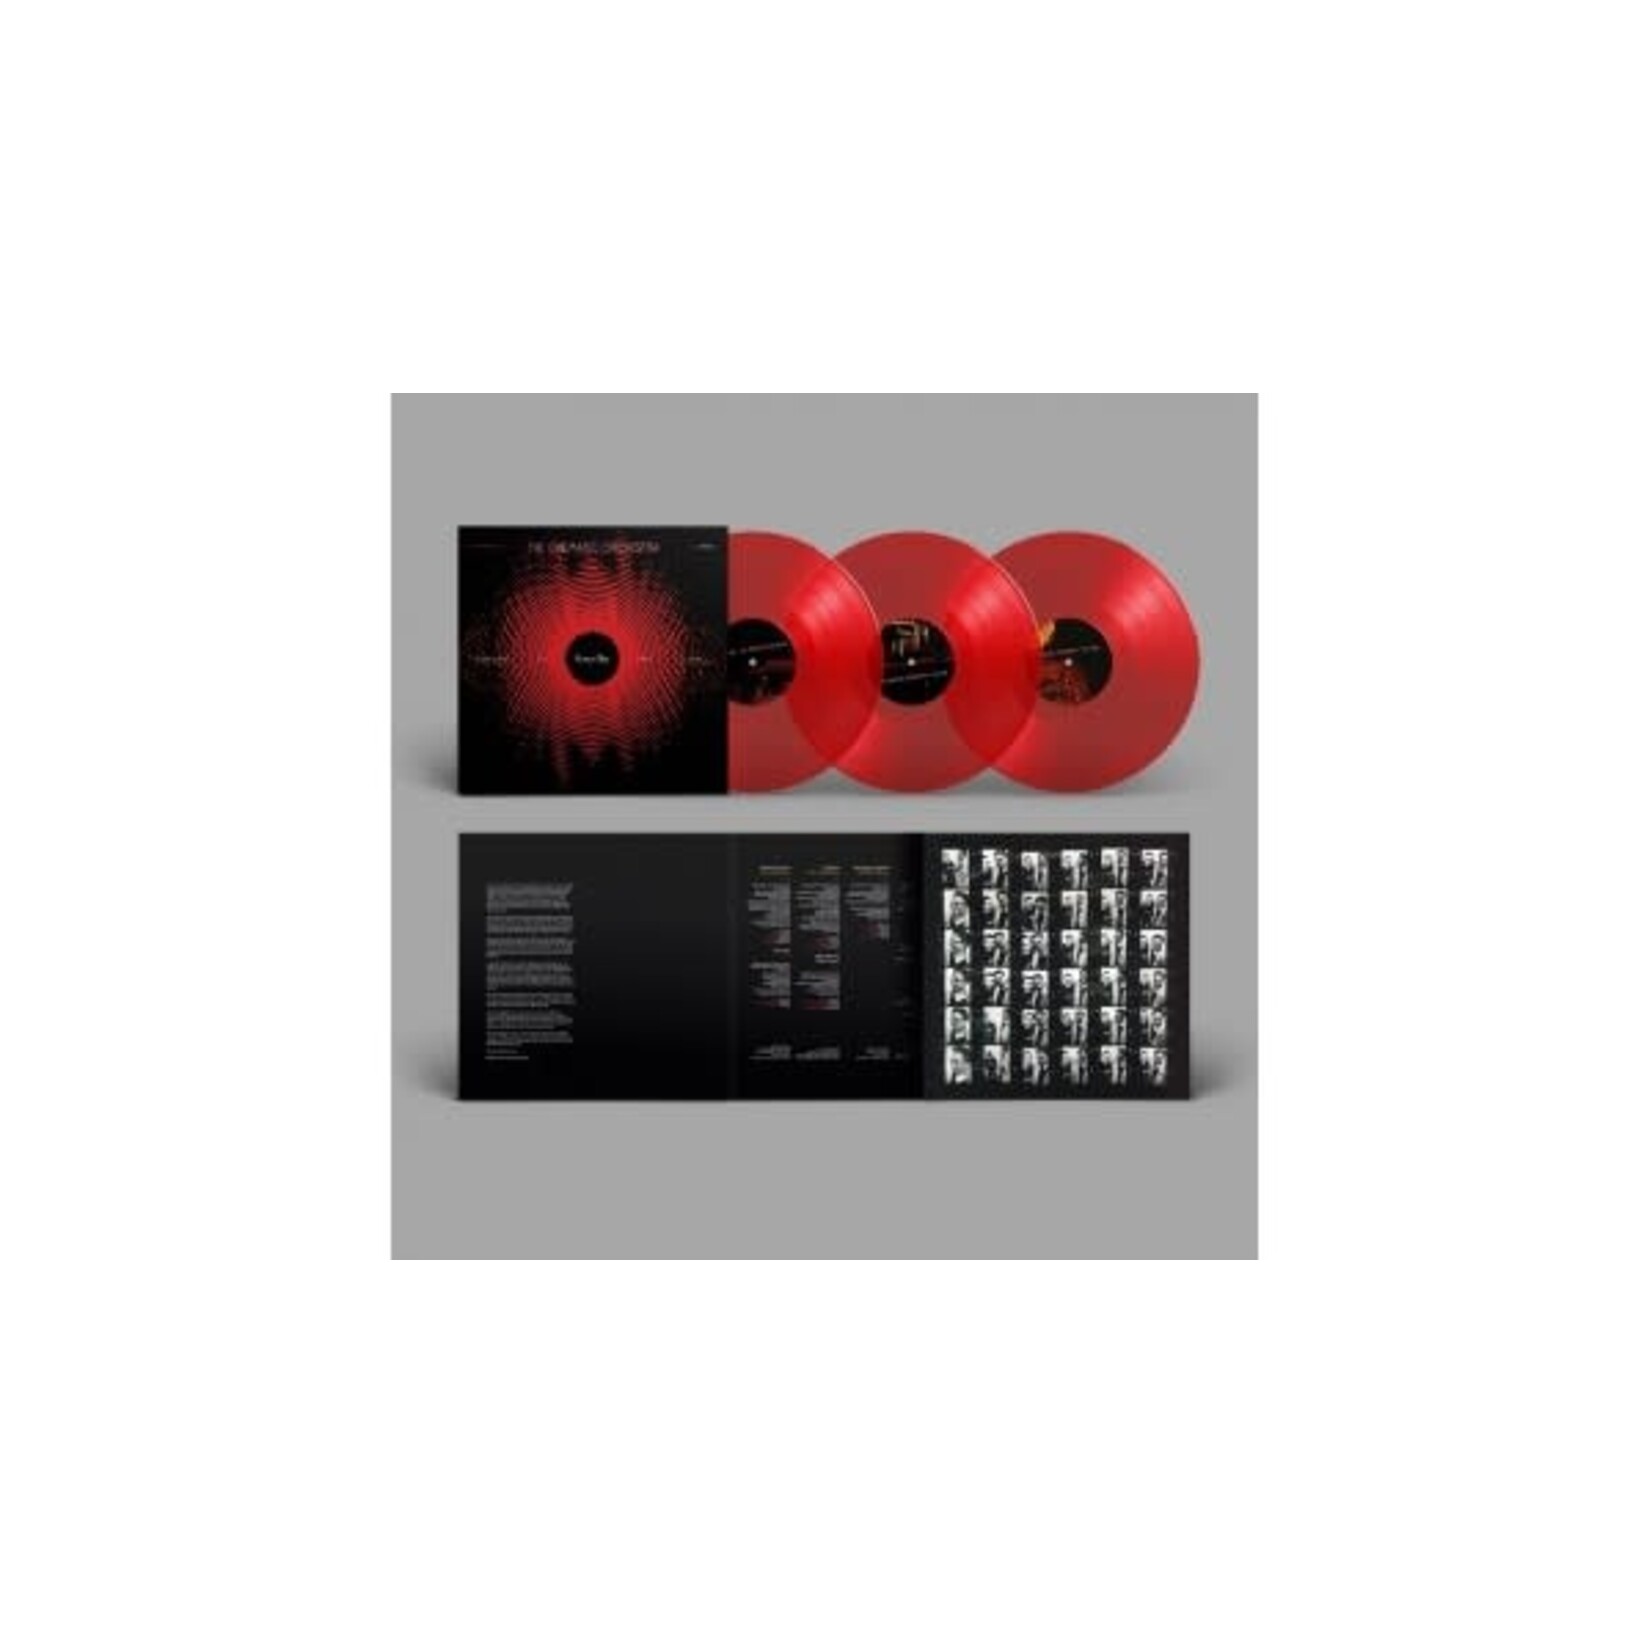 [New] The Cinematic Orchestra - Every Day (20th Anniversary Edition, translucent red vinyl)